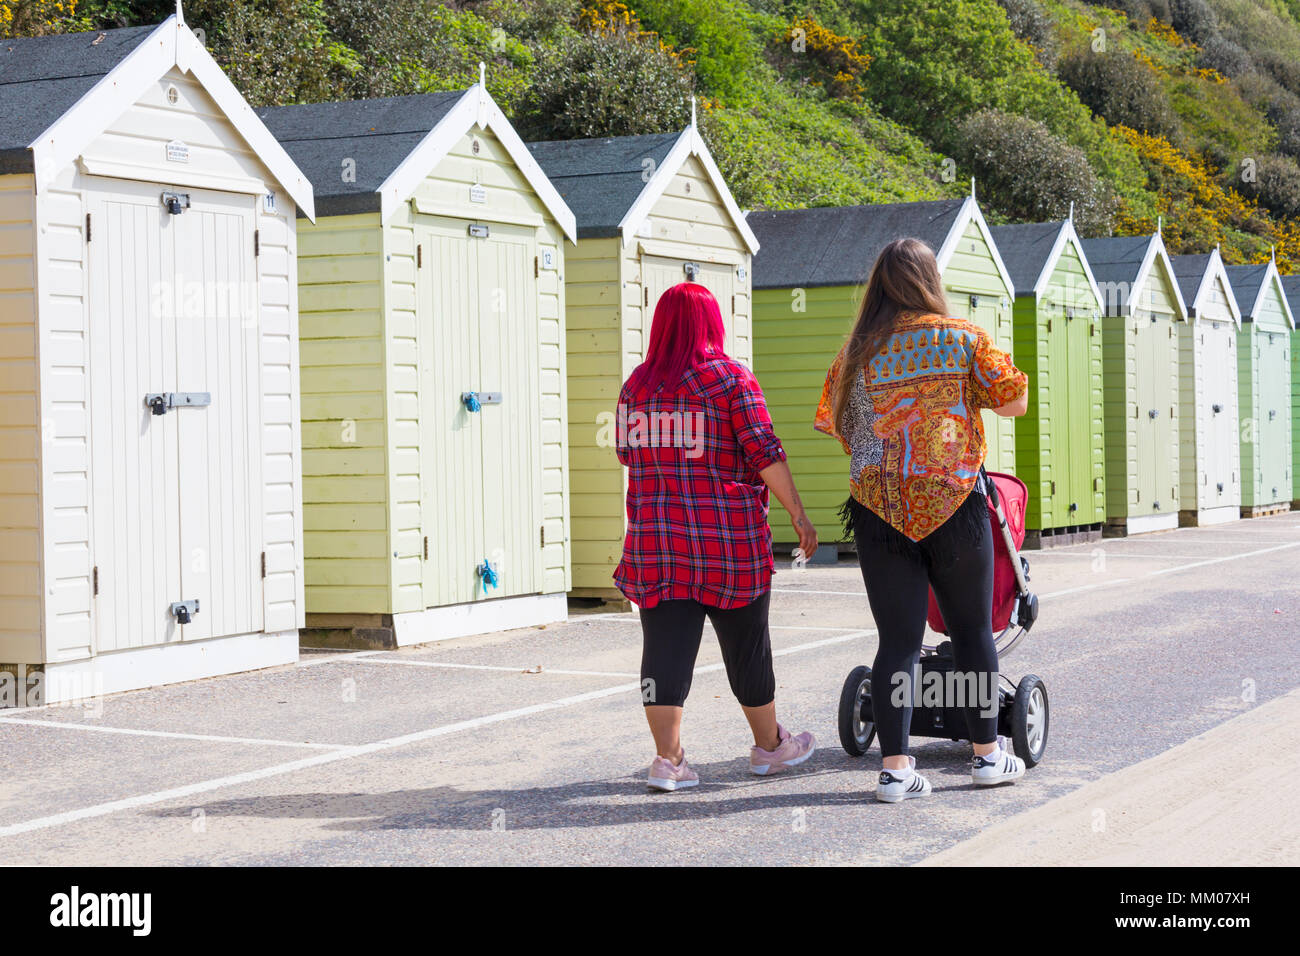 Bournemouth, Dorset, UK. 9th May 2018. UK weather: the sun is still shining! Another warm sunny start to the day, as visitors head to the beach before the weather changes. Colourful women strolling past beach huts! Stock Photo